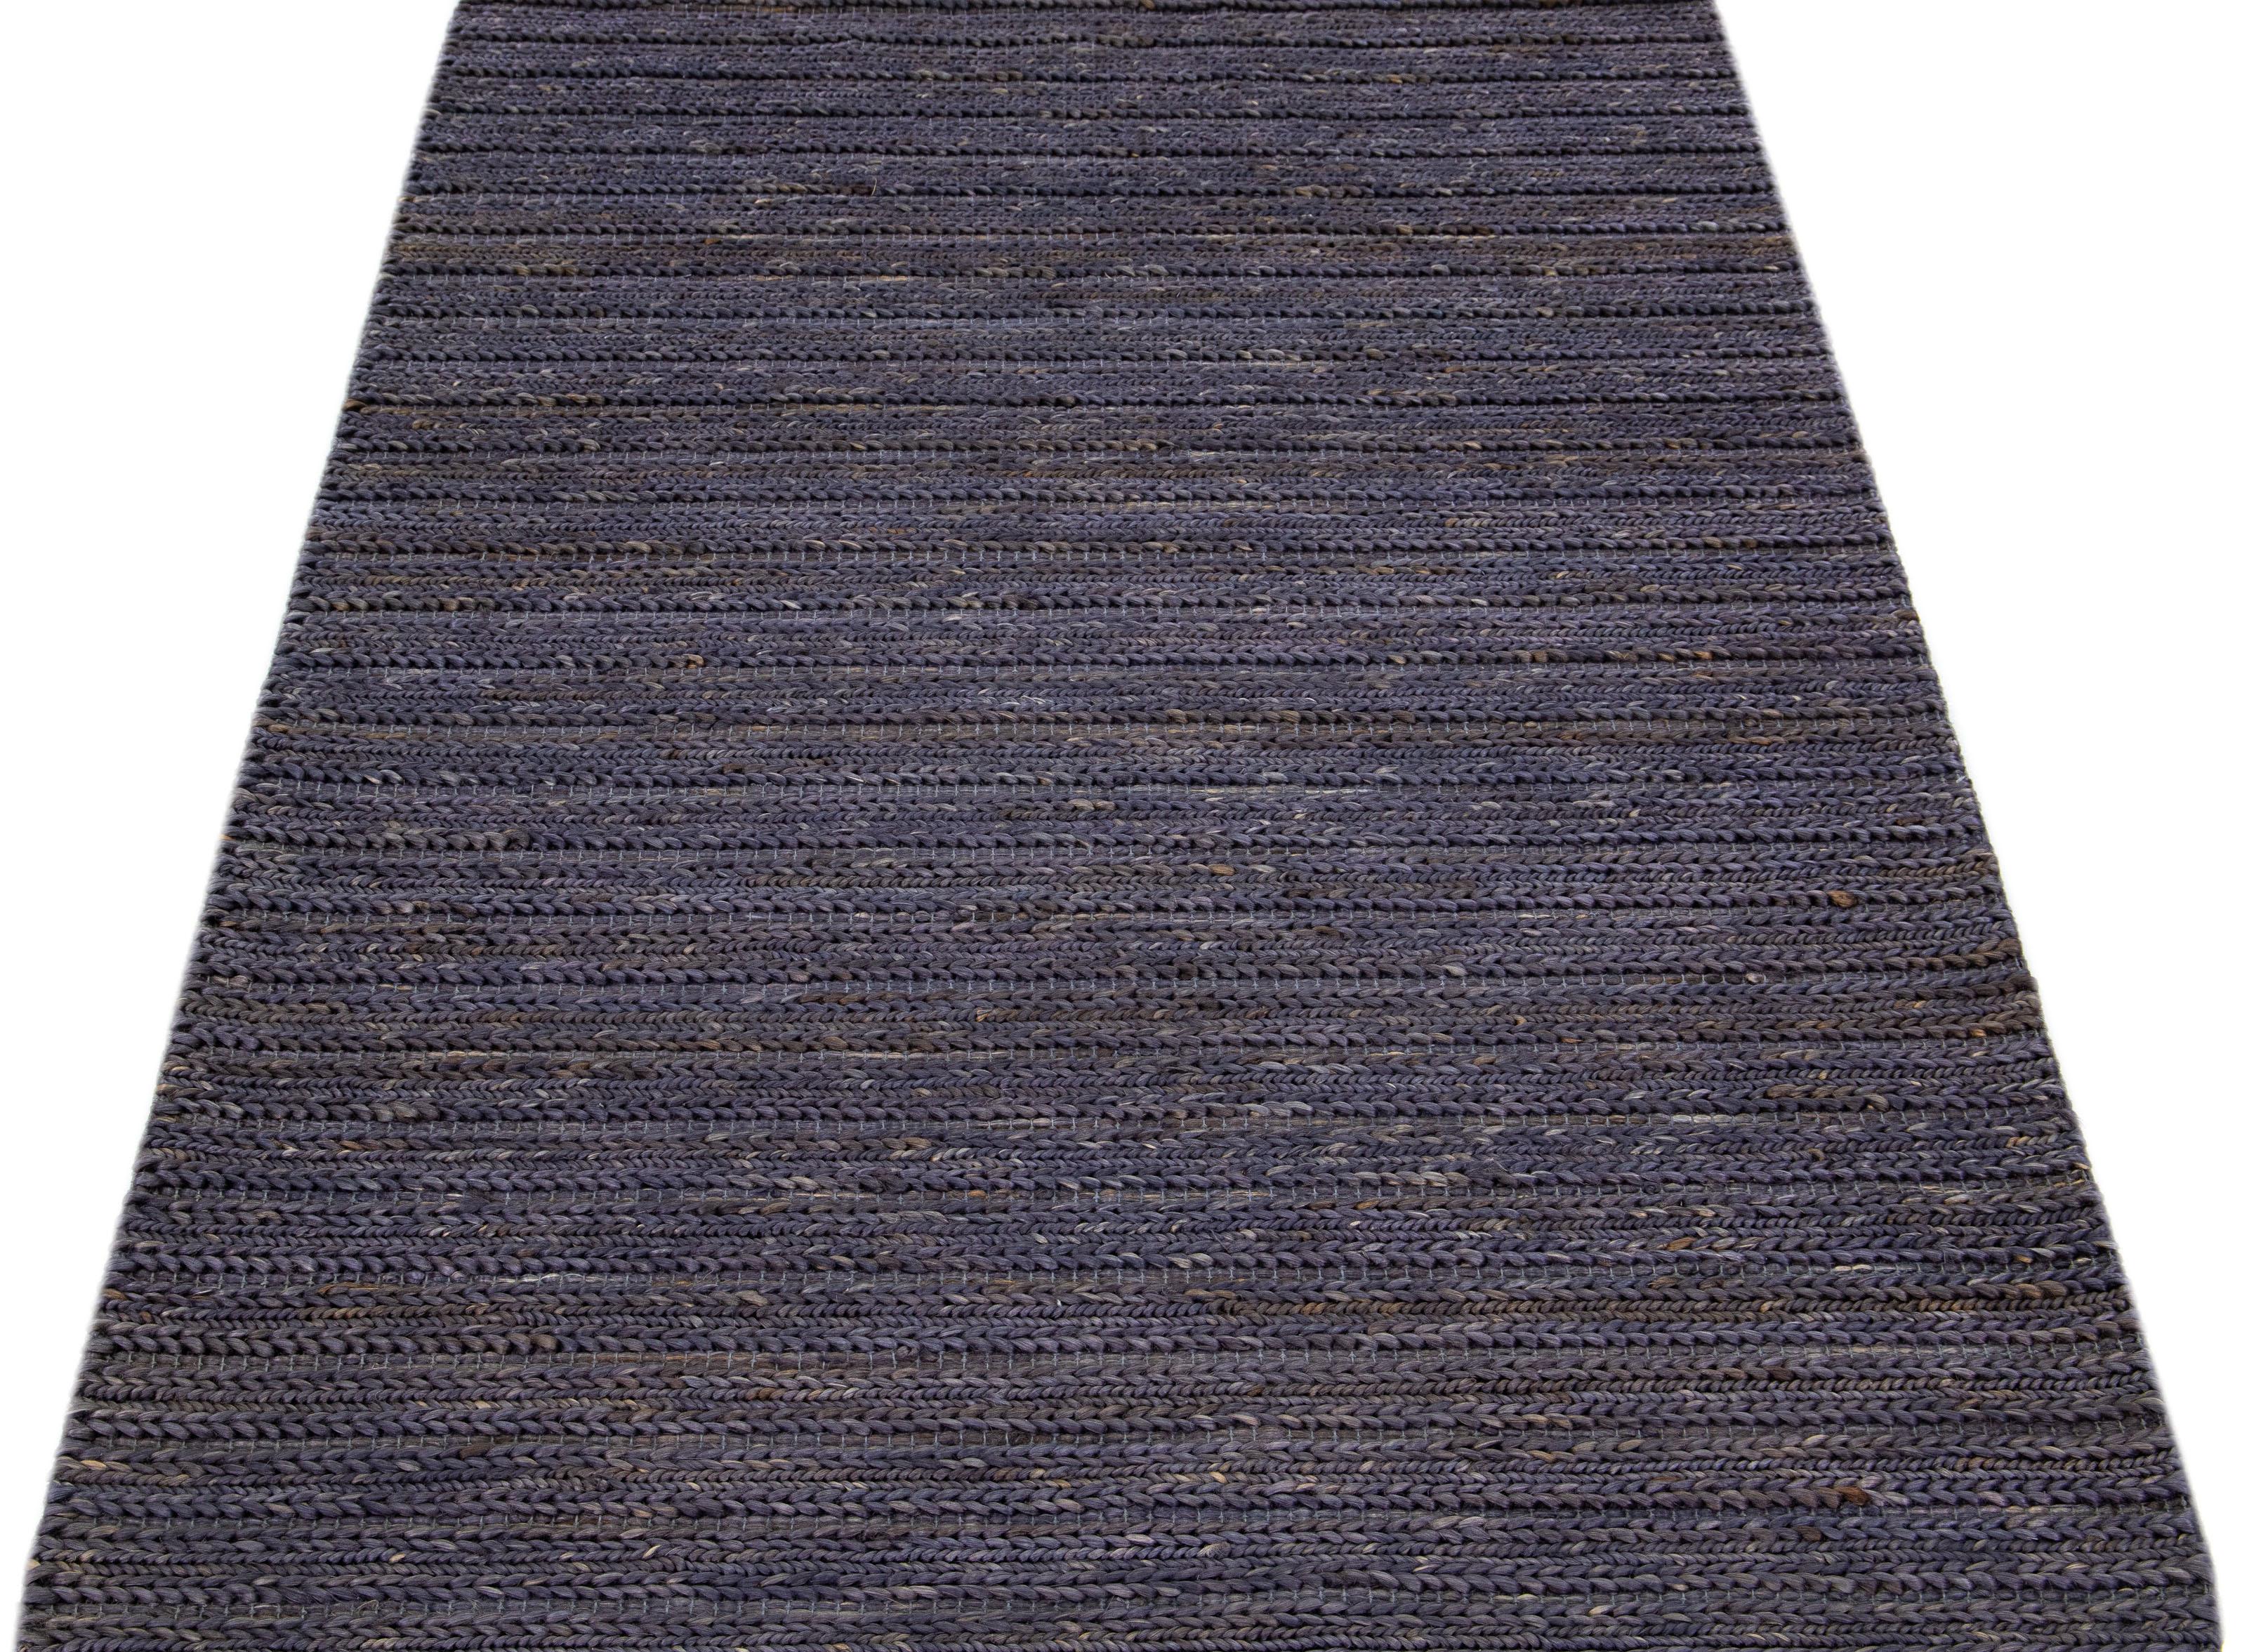 Beautiful natural hand-woven 70% jute and 30% cotton rug with the gray-onyx braided field. This Modern rug is perfect for farmhouse, coastal, rustic, bohemian, or contemporary styles of décor. It has a simple solid design that creates subtle shifts